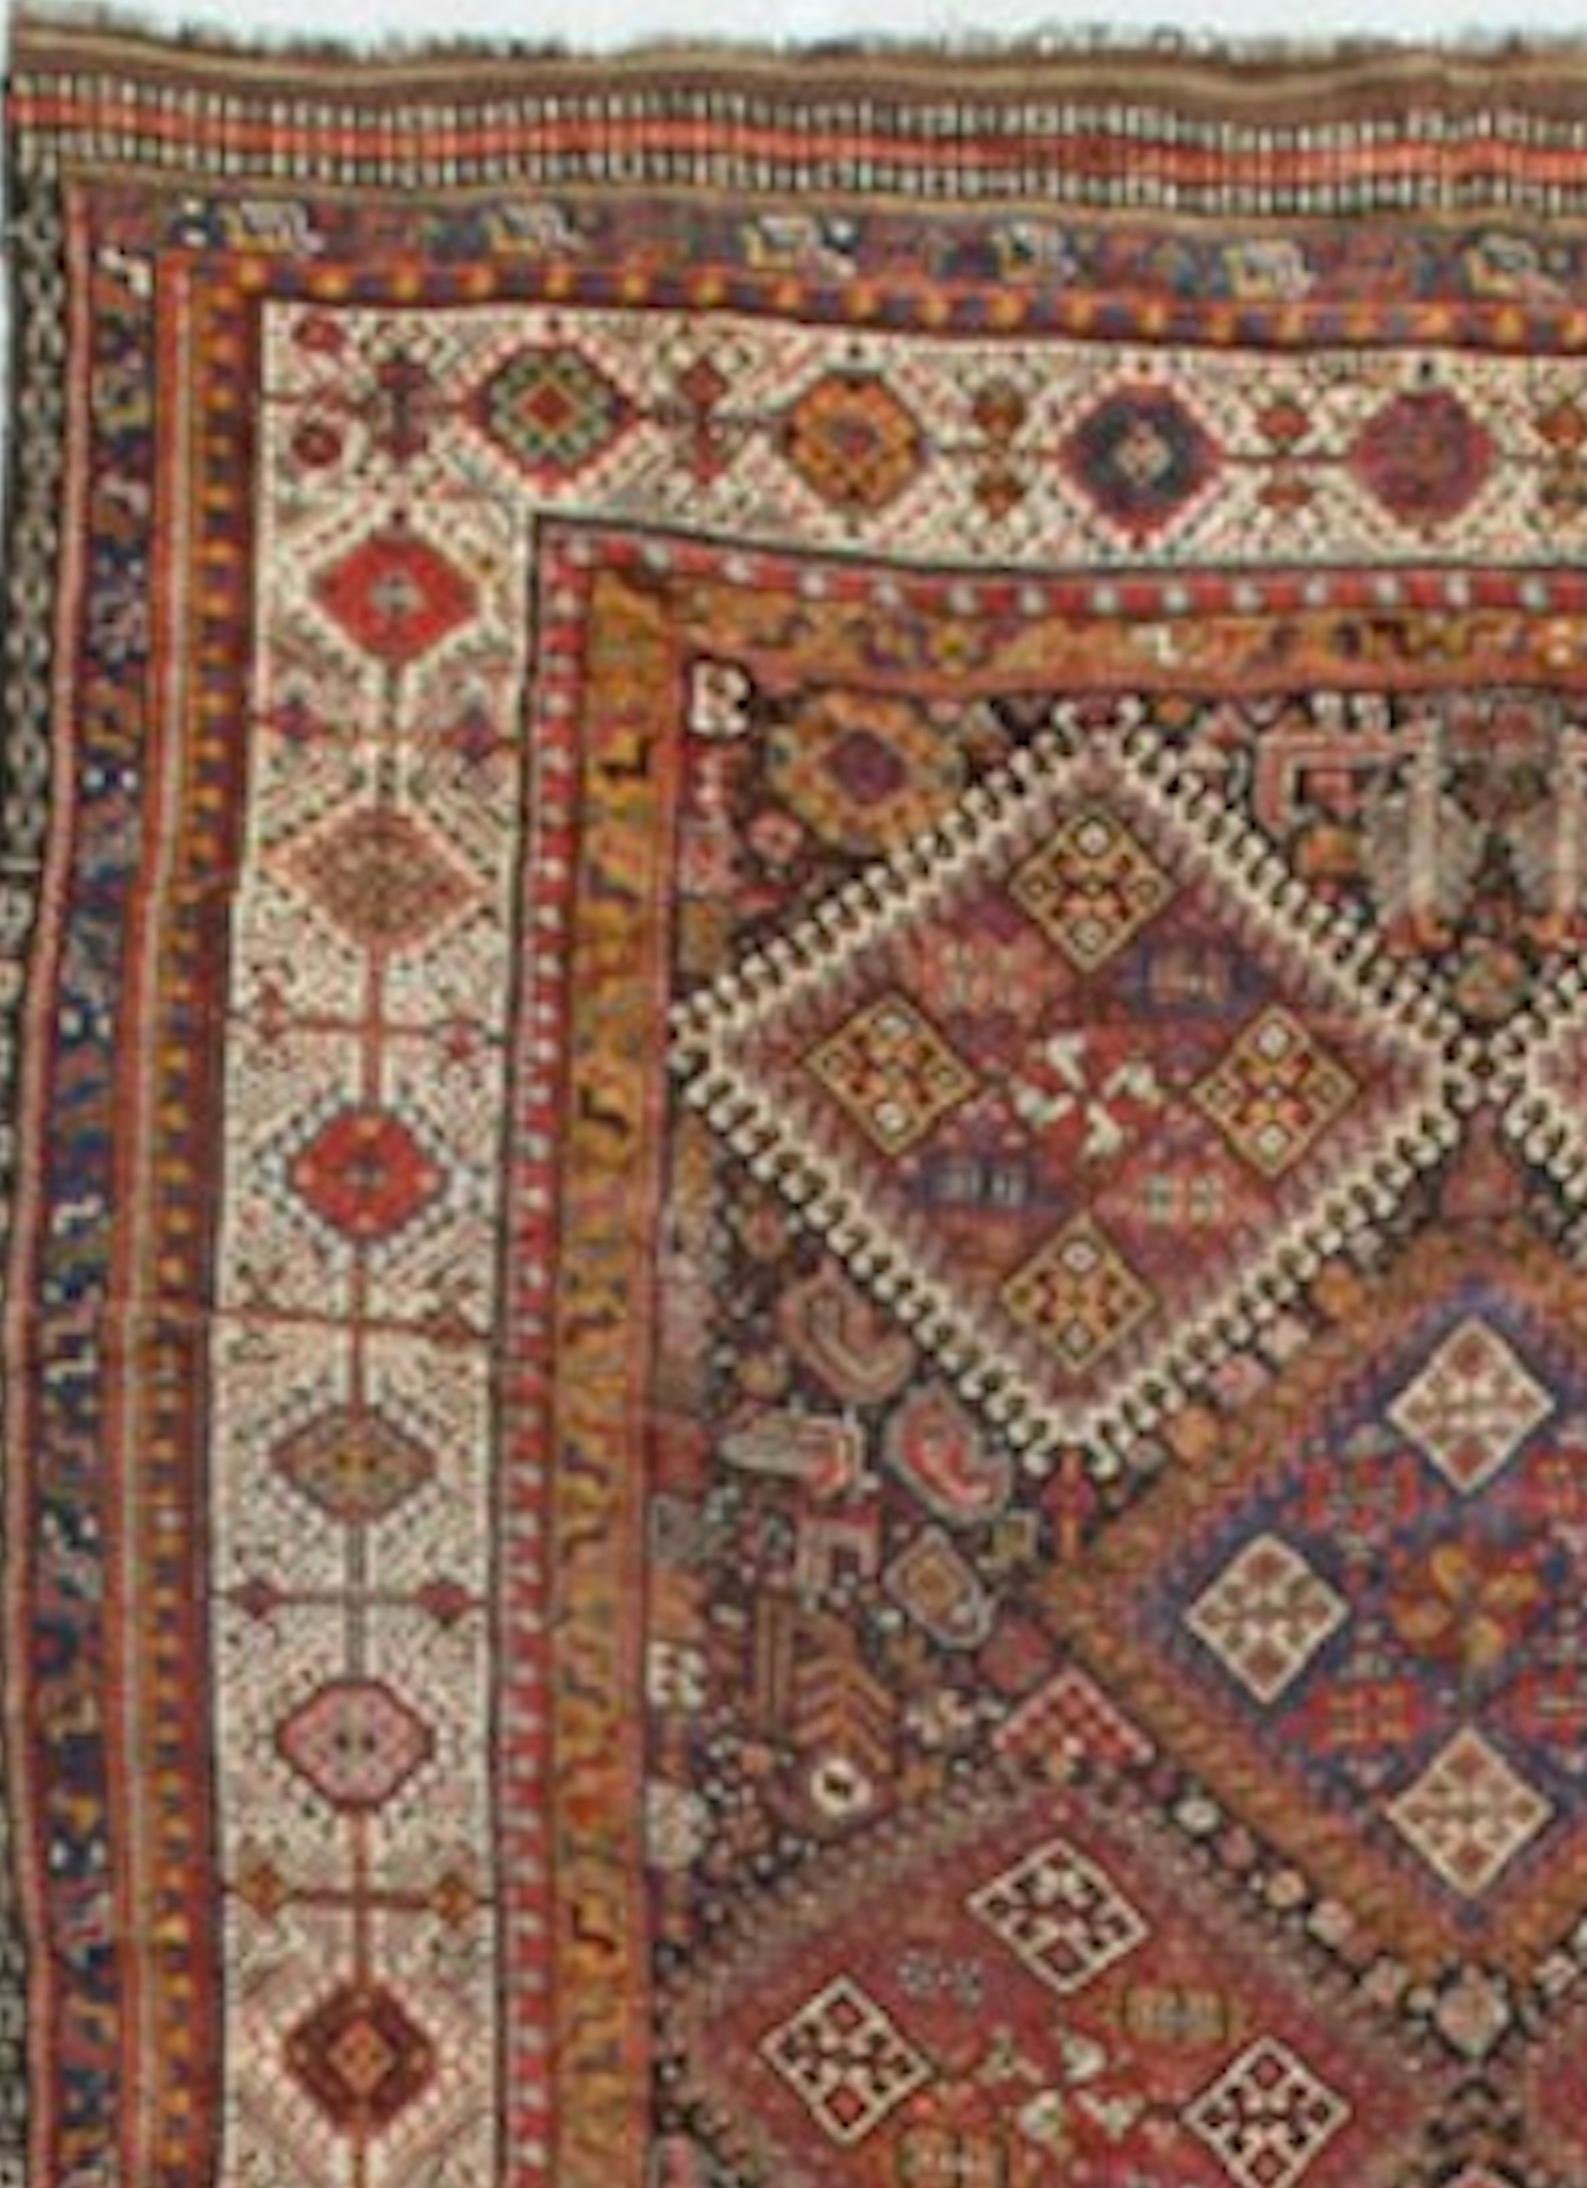 This vintage Qashqai is exceptional for a number of reason, the first being its size, hard to find especially in an antique or vintage piece. The beauty of the central field, filled with a vast selection of patterns and colors, is complimented so